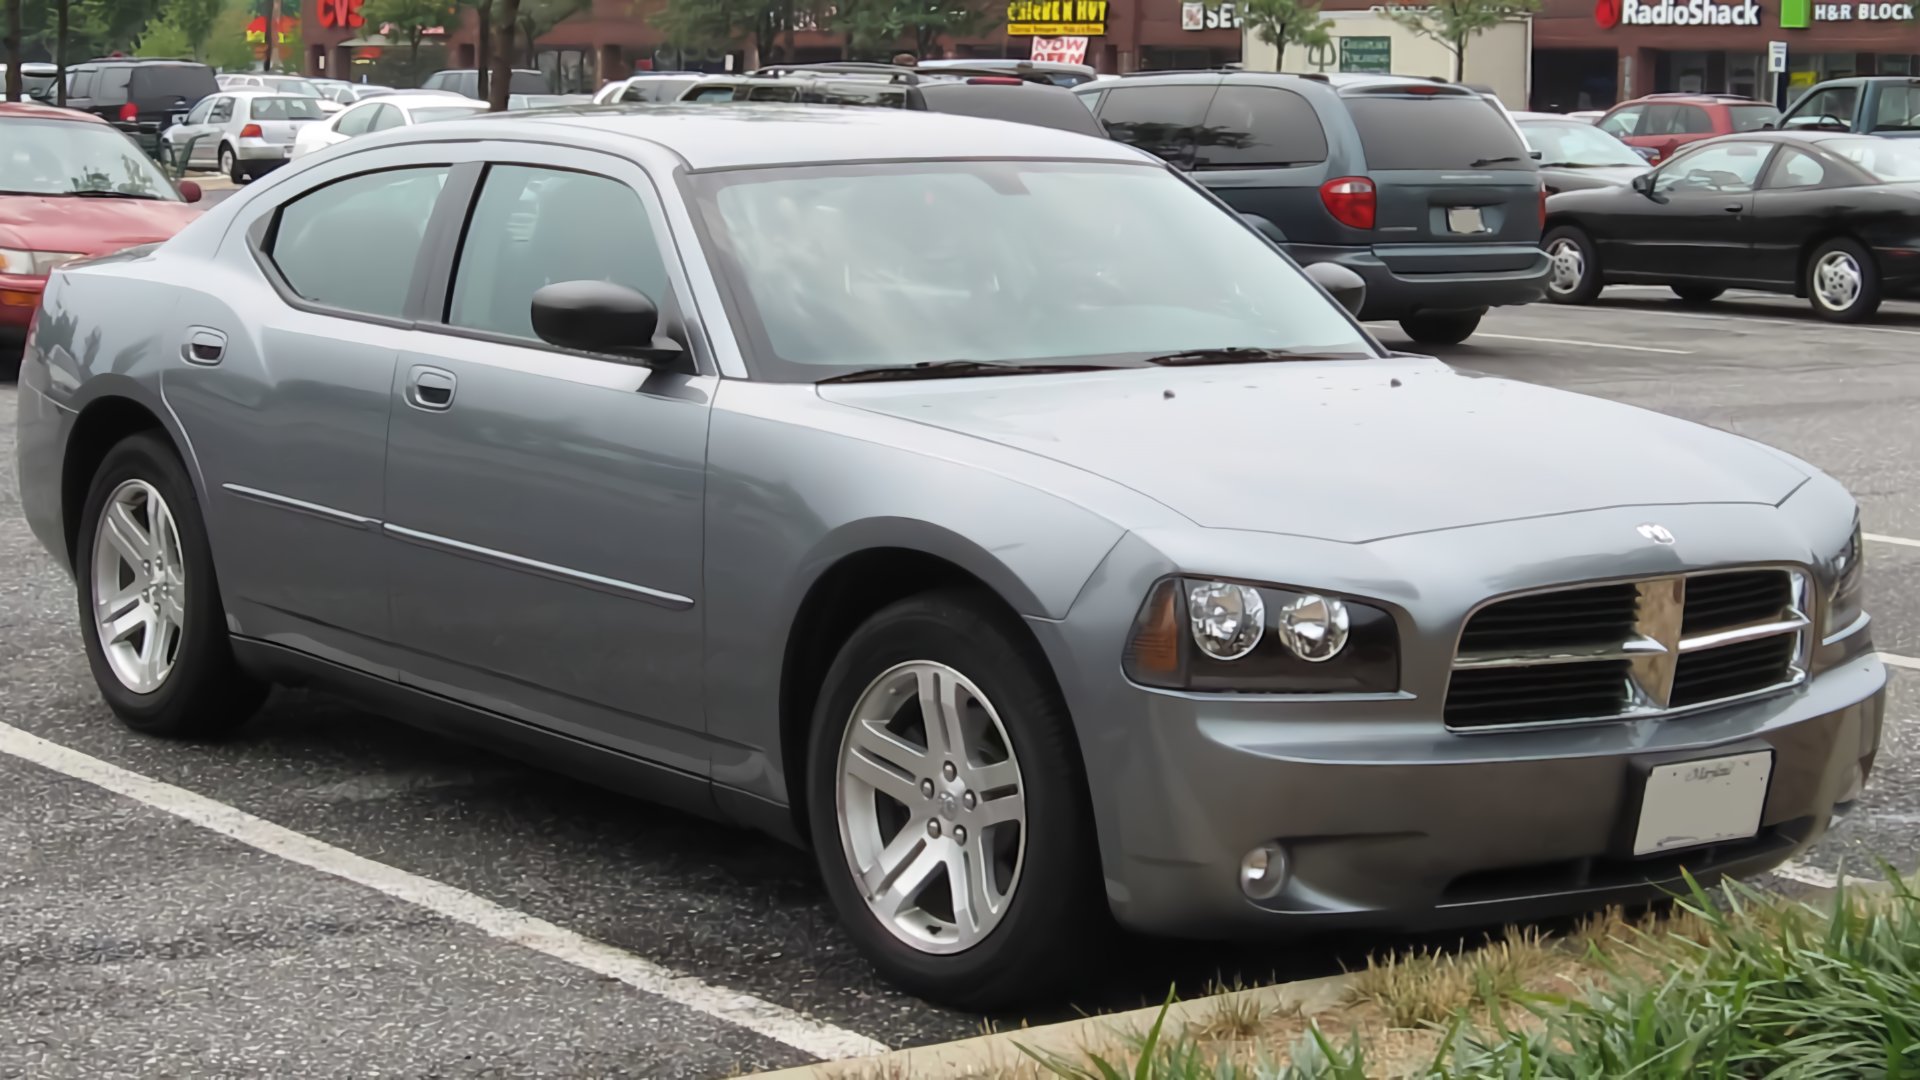 a silver car is parked in a parking lot.